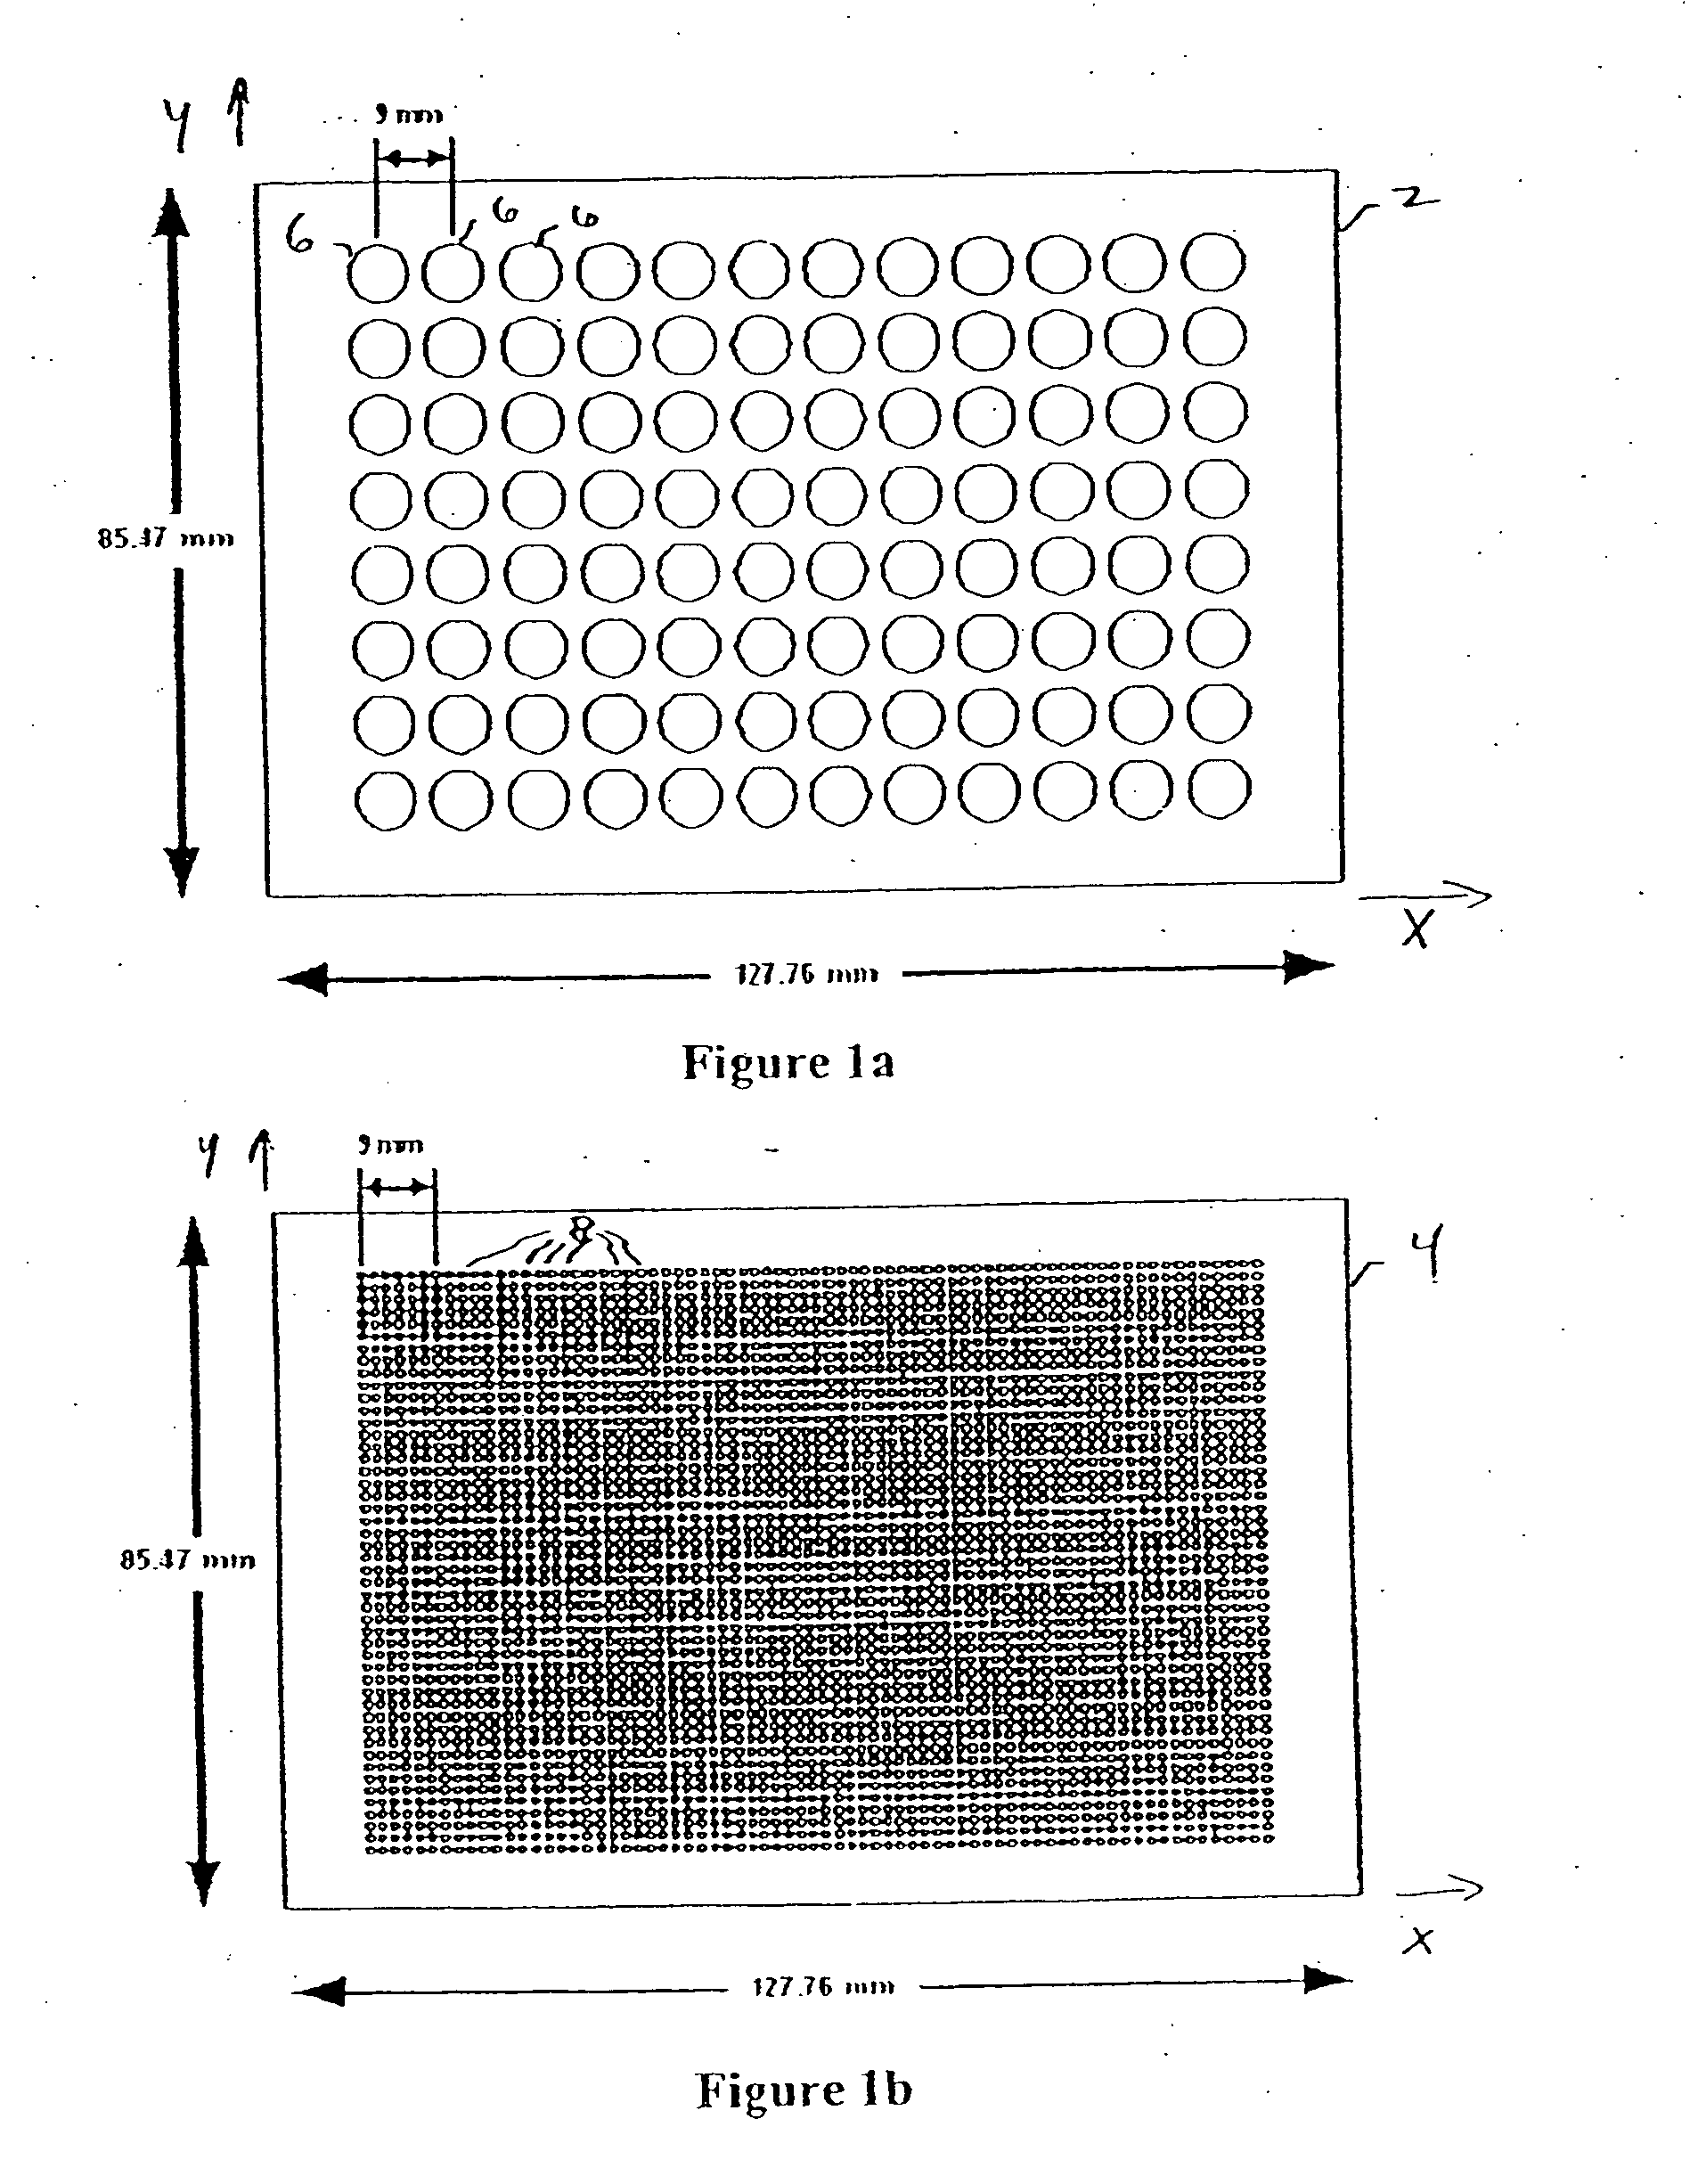 Multi-well plate providing a high-density storage and assay platform